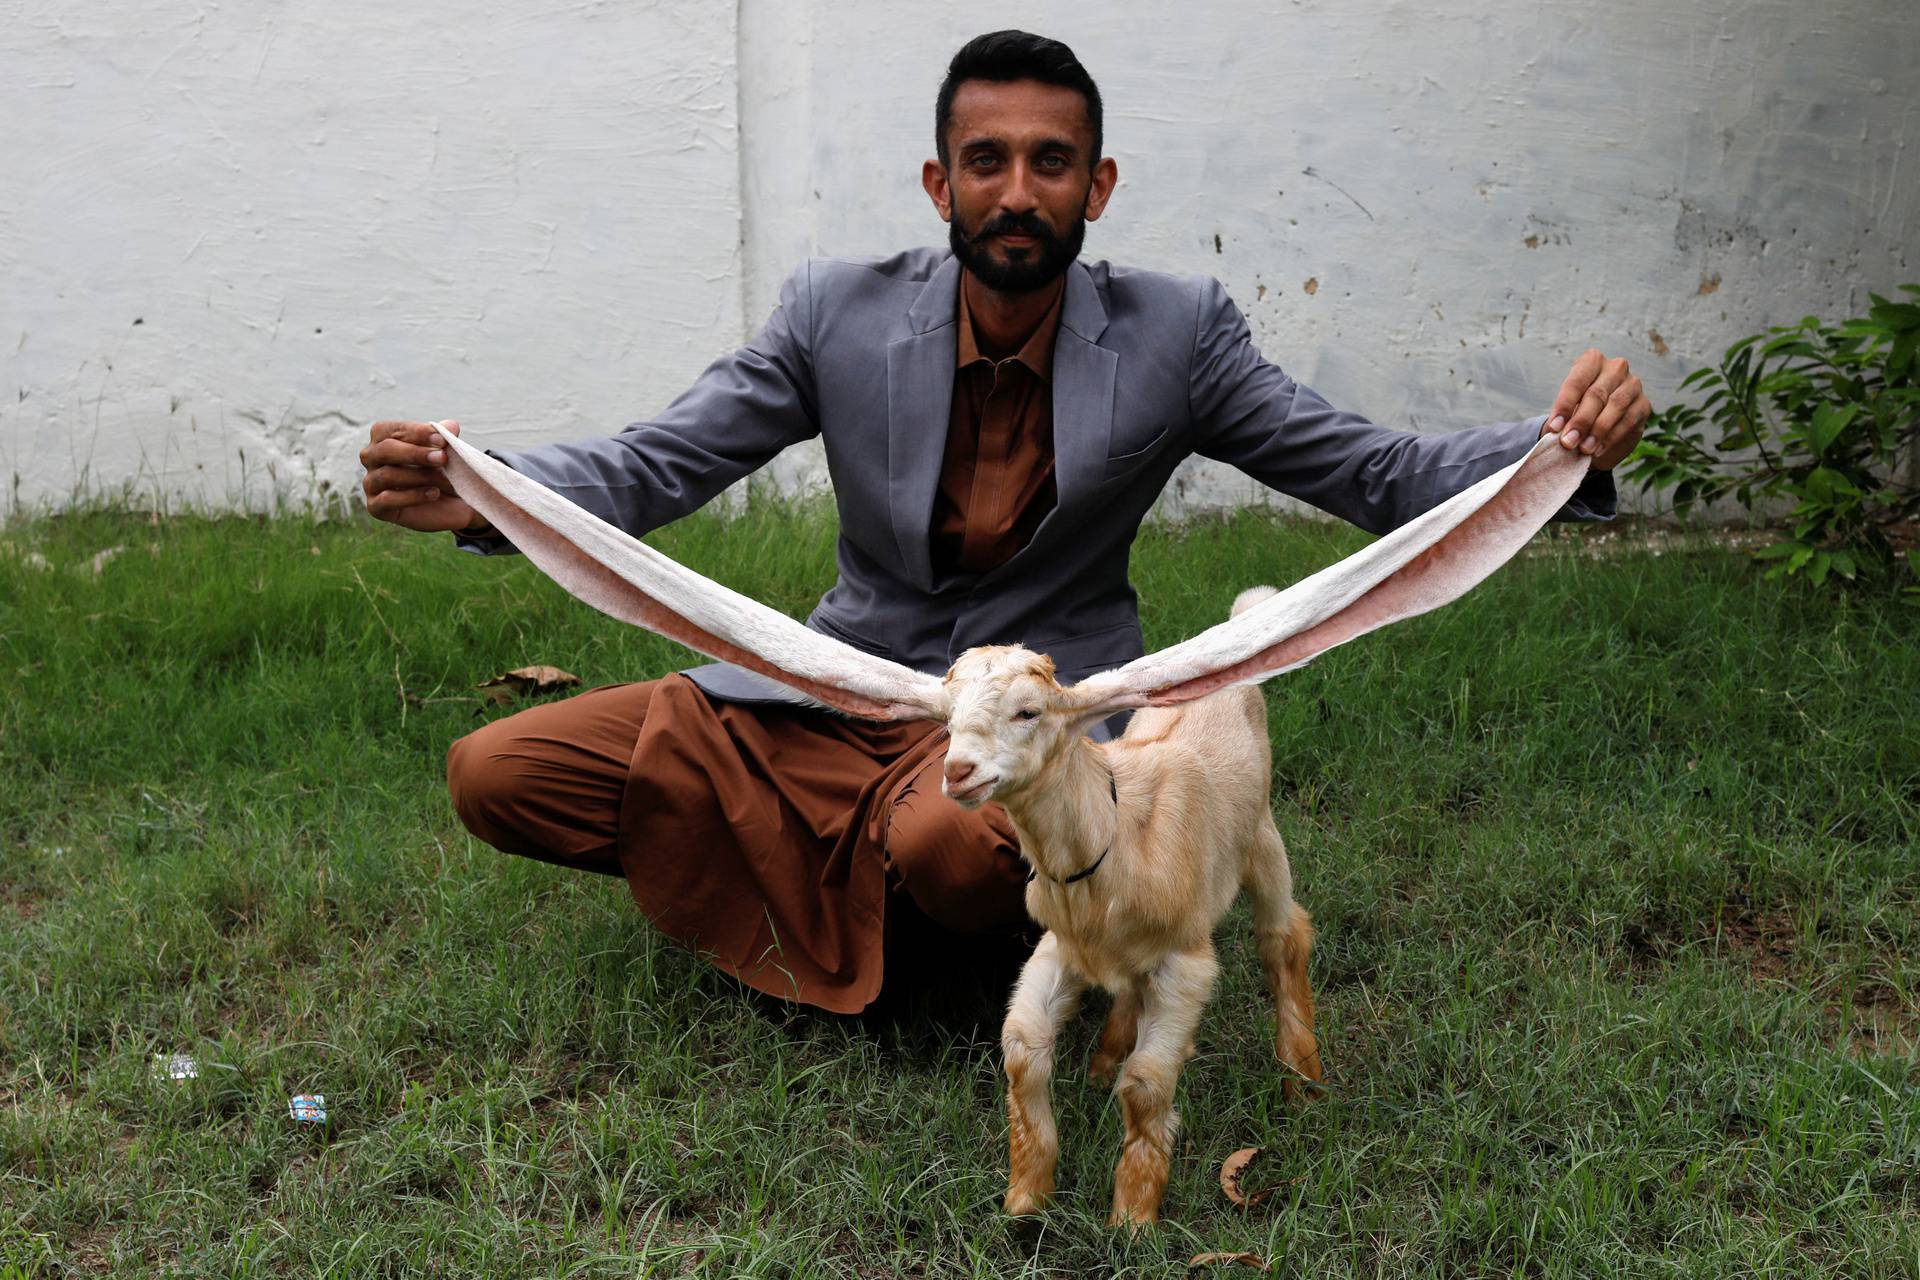 Simba, one month and four days old kid goat with 22-inch long ears, in Karachi